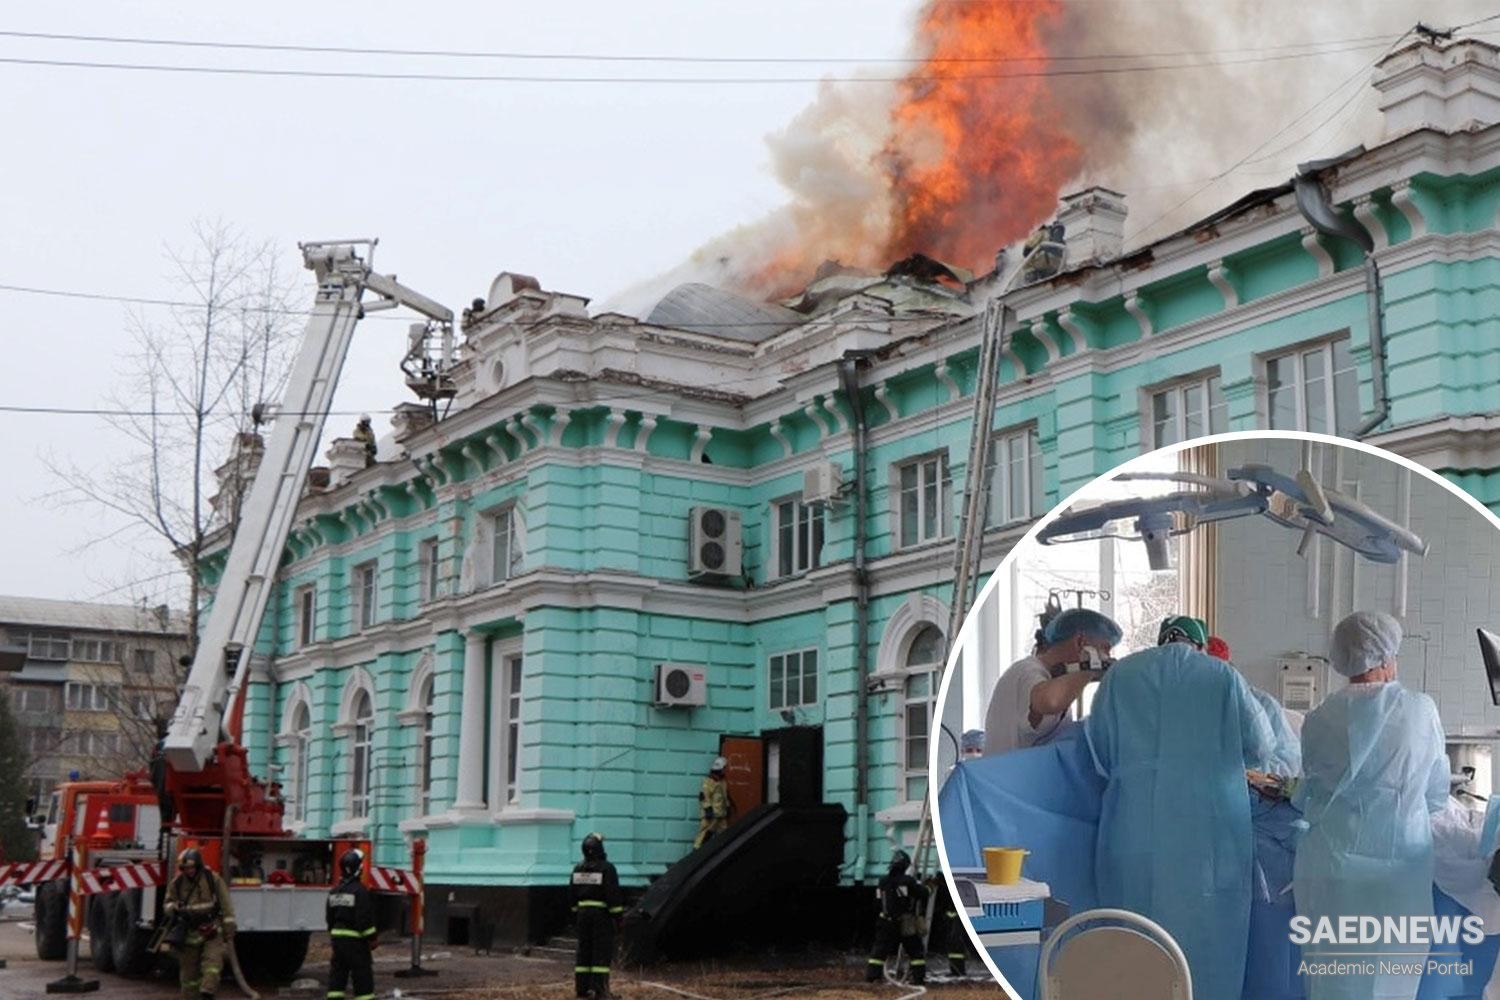 Russian Doctors Continued Their Open Heart Surgery Despite the Blaze